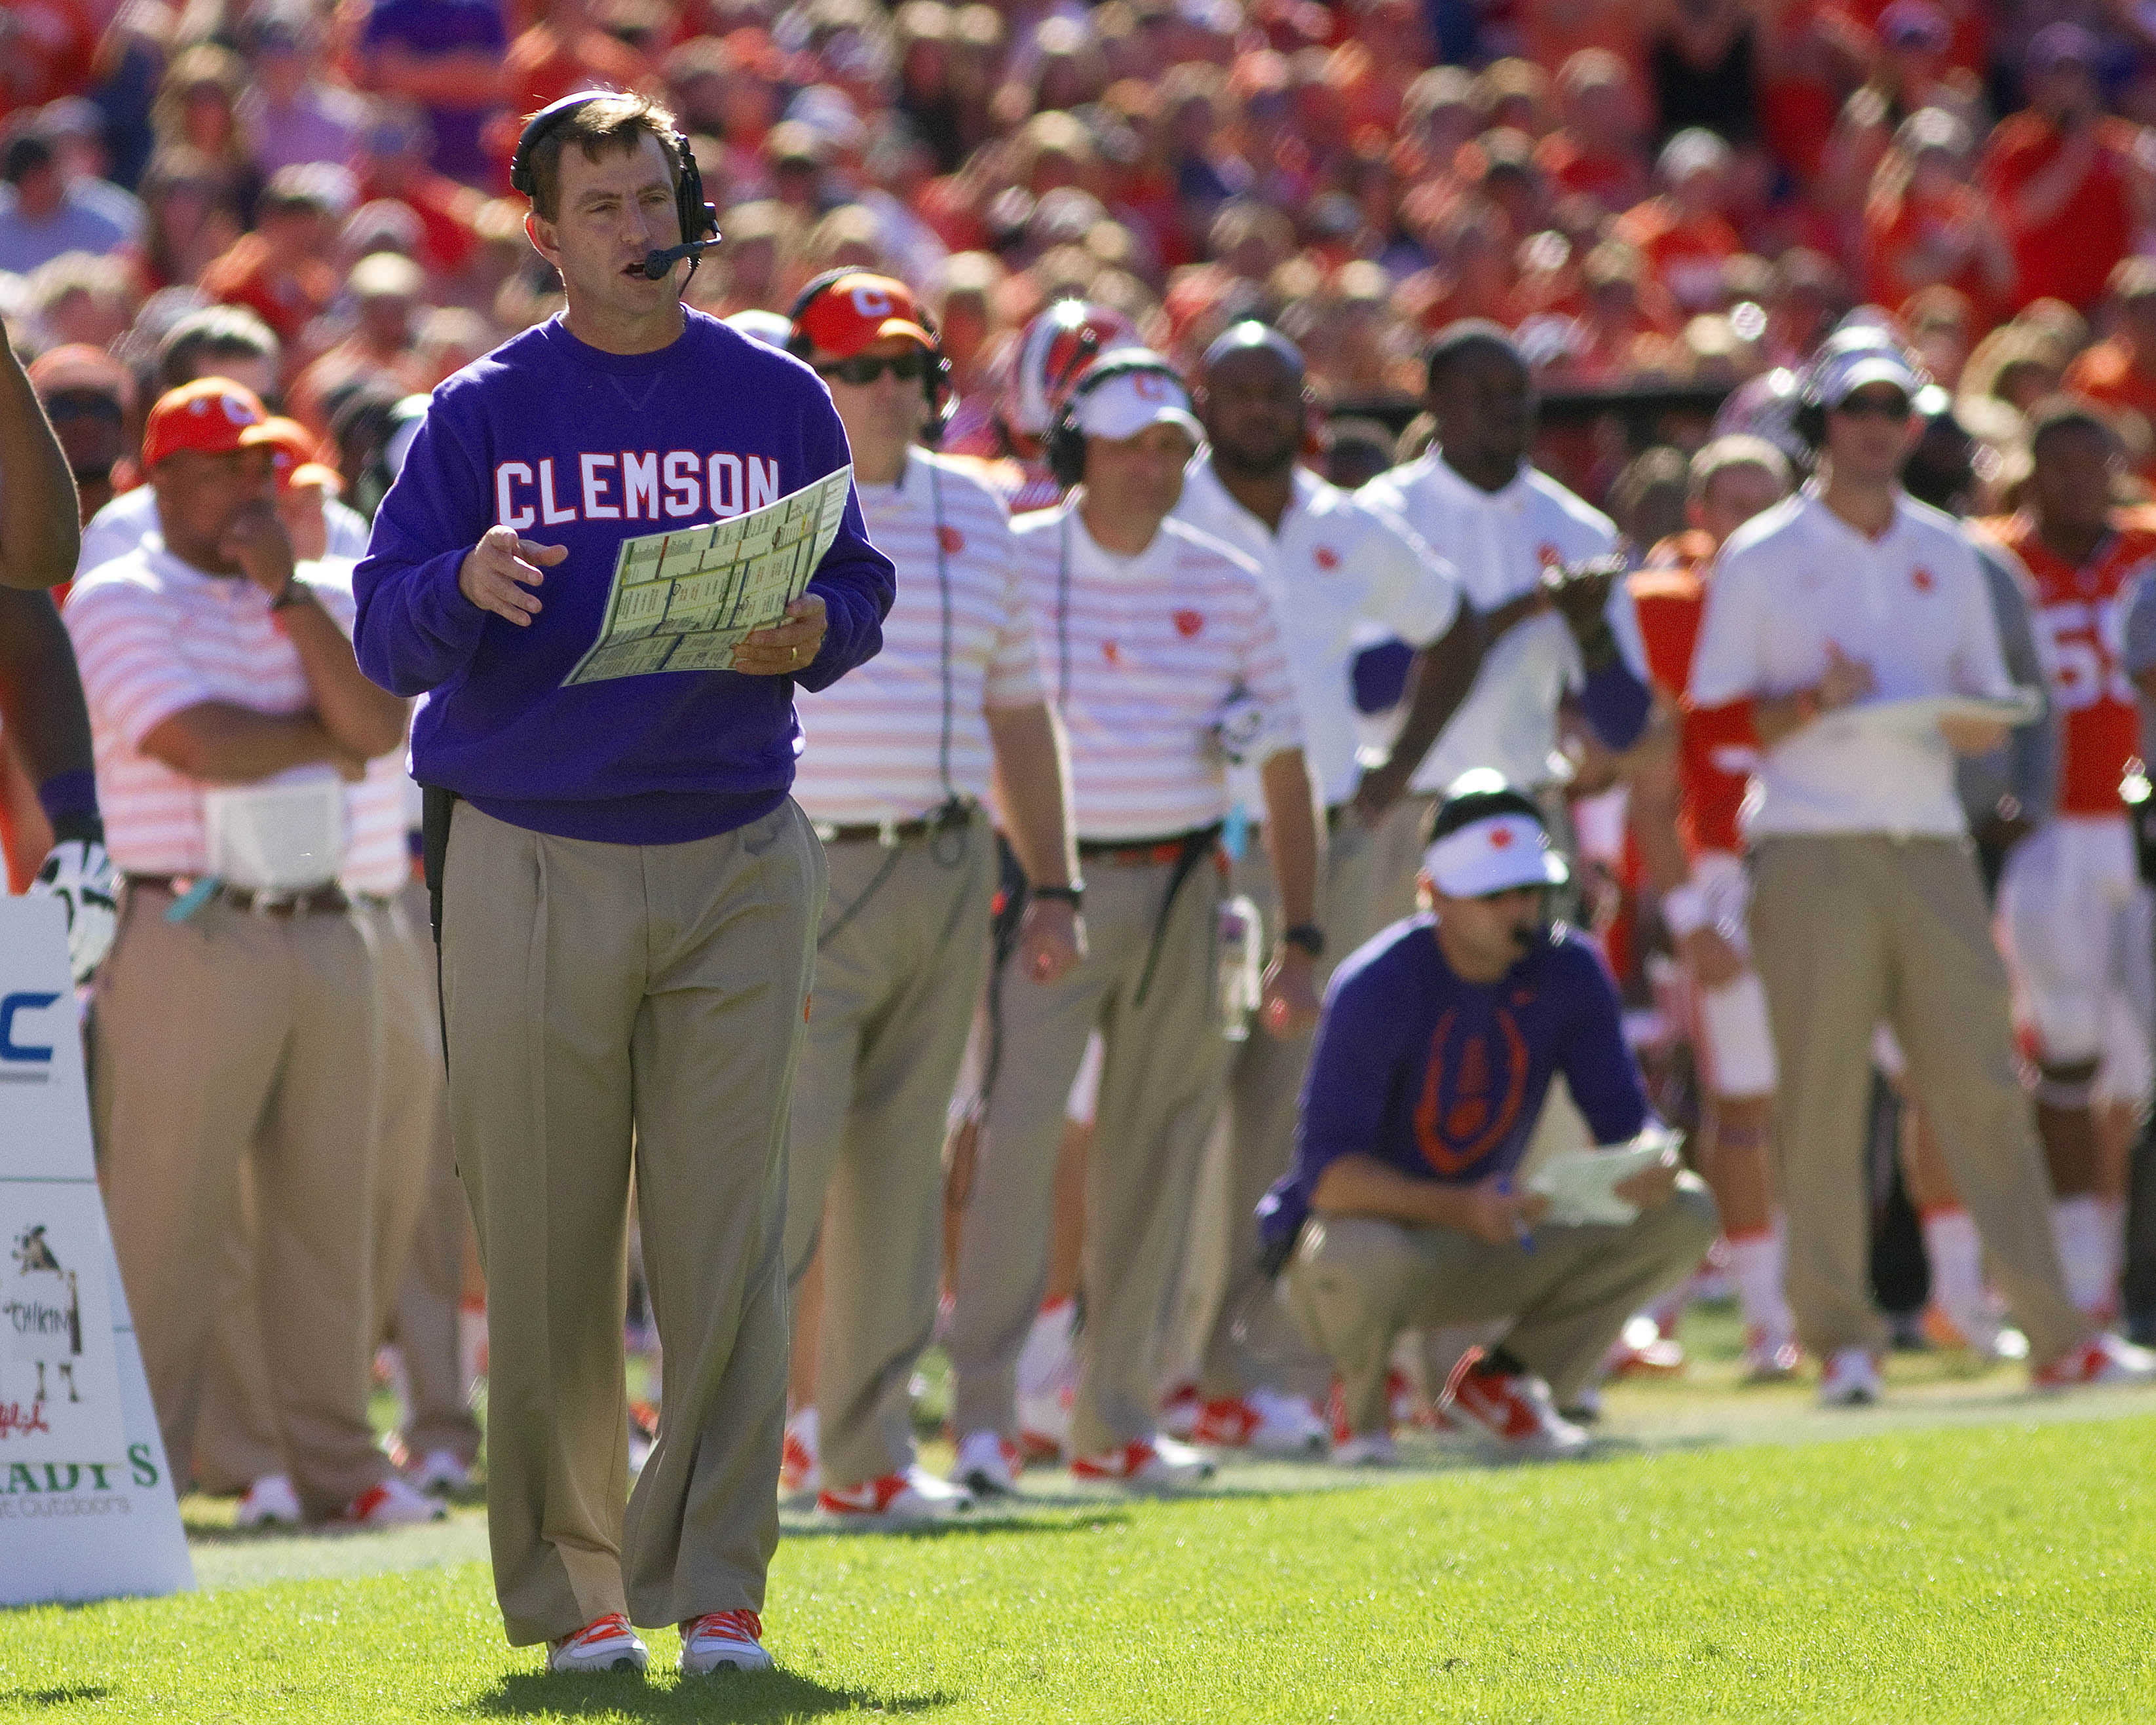 Oct 4, 2014; Clemson, SC, USA; Clemson Tigers head coach Dabo Swinney during the second quarter against the North Carolina State Wolfpack at Clemson Memorial Stadium. Mandatory Credit: Joshua S. Kelly-USA TODAY Sports